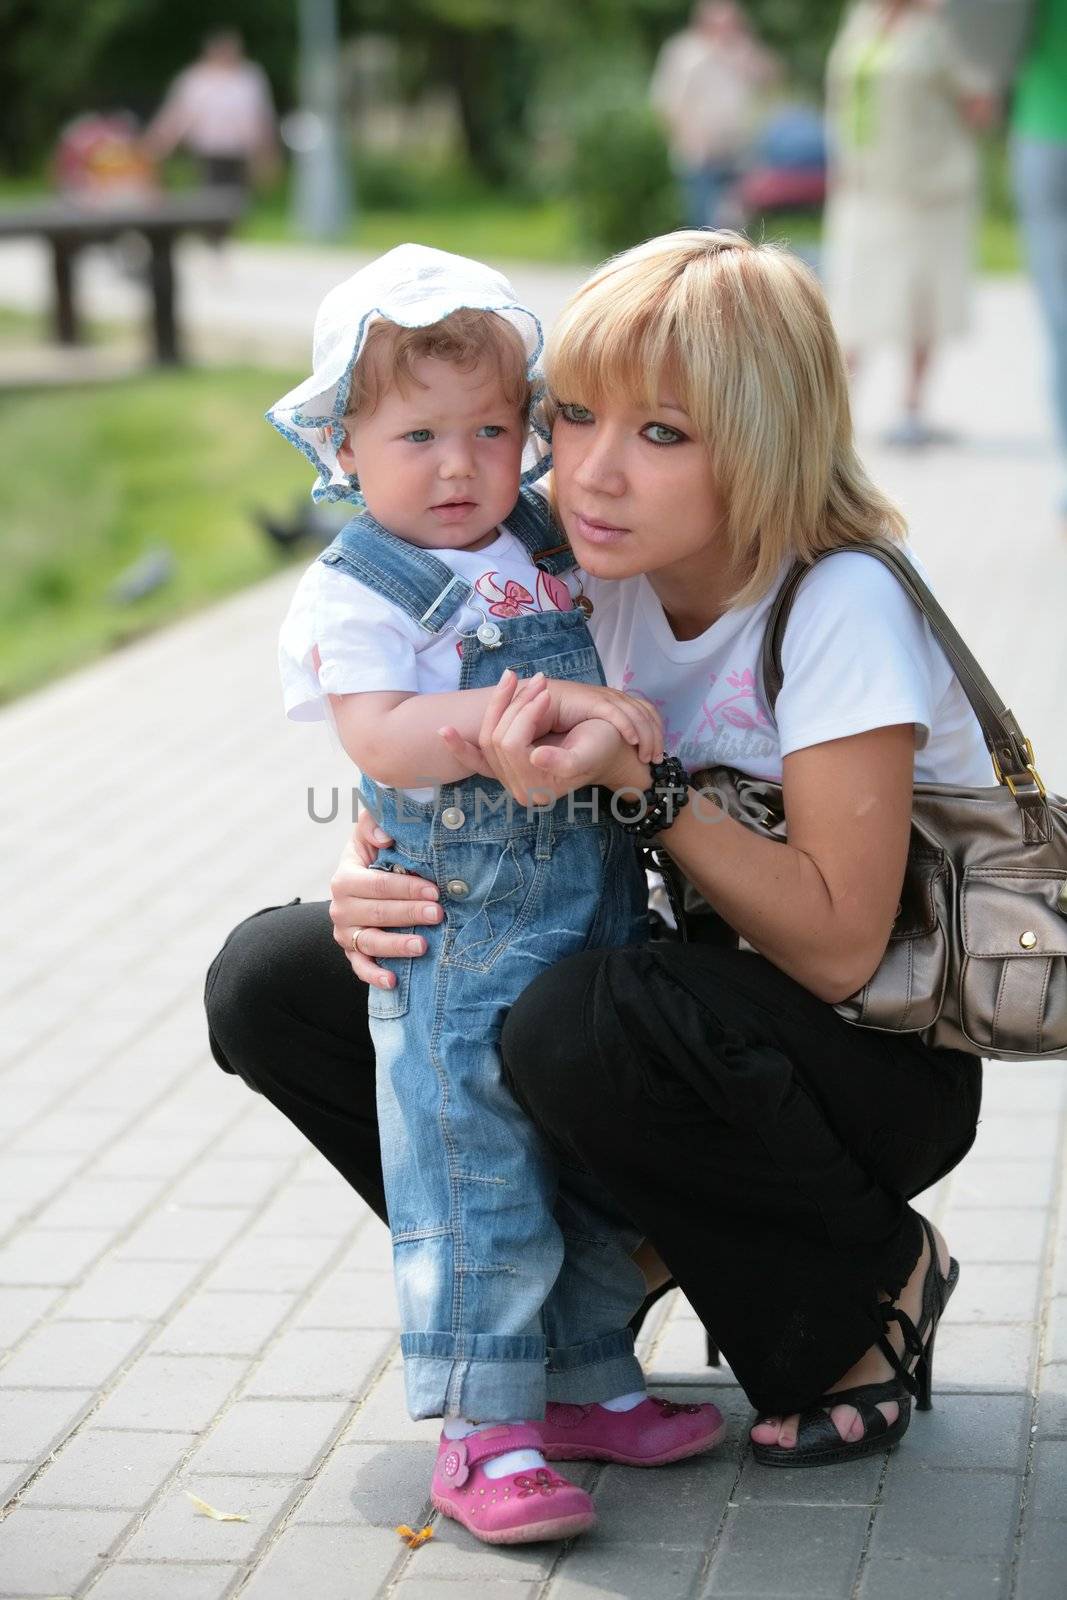 mamma and daughter in park on walk